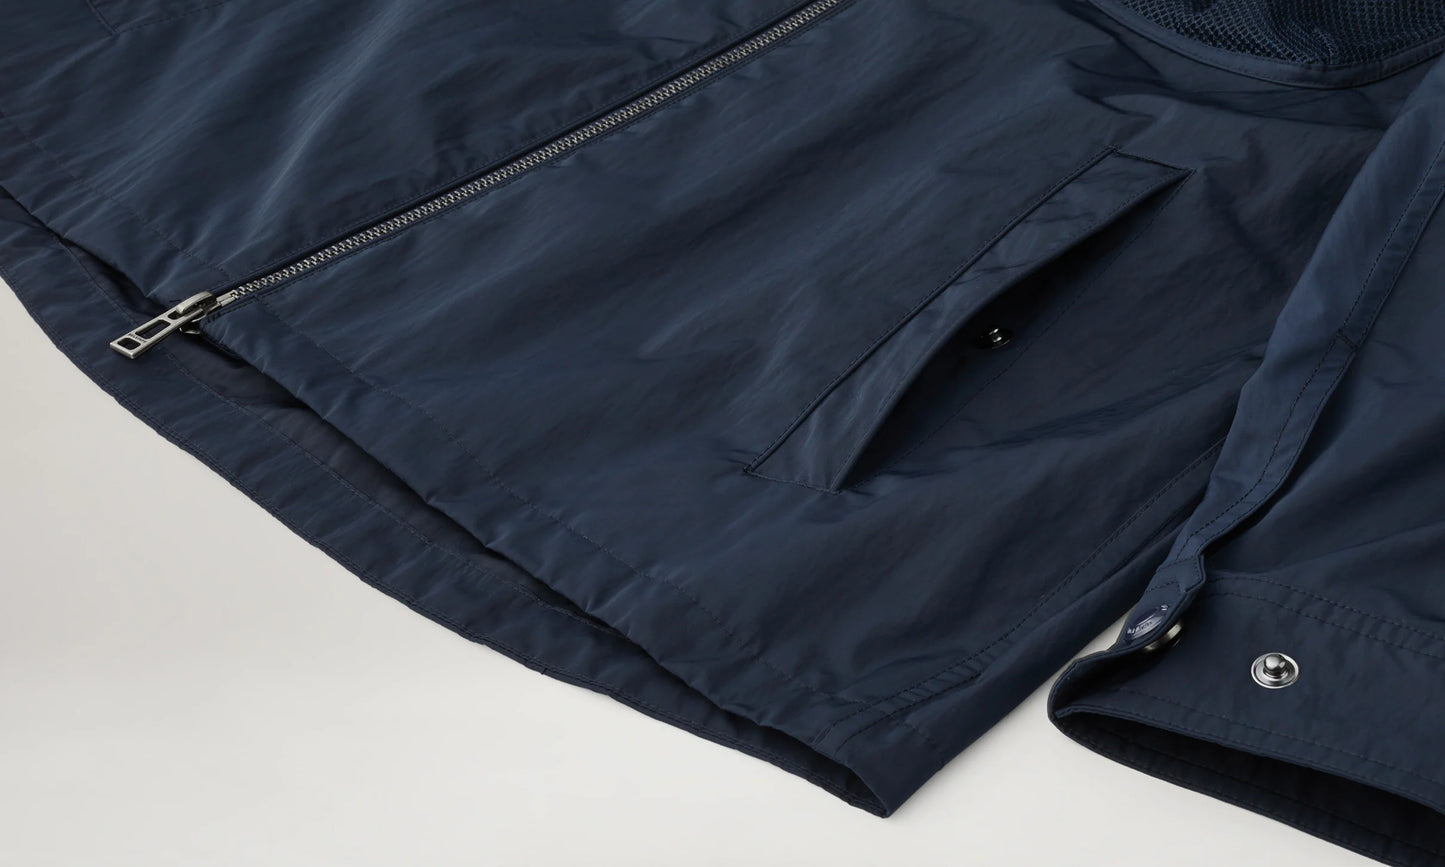 Navy Outline Overshirt